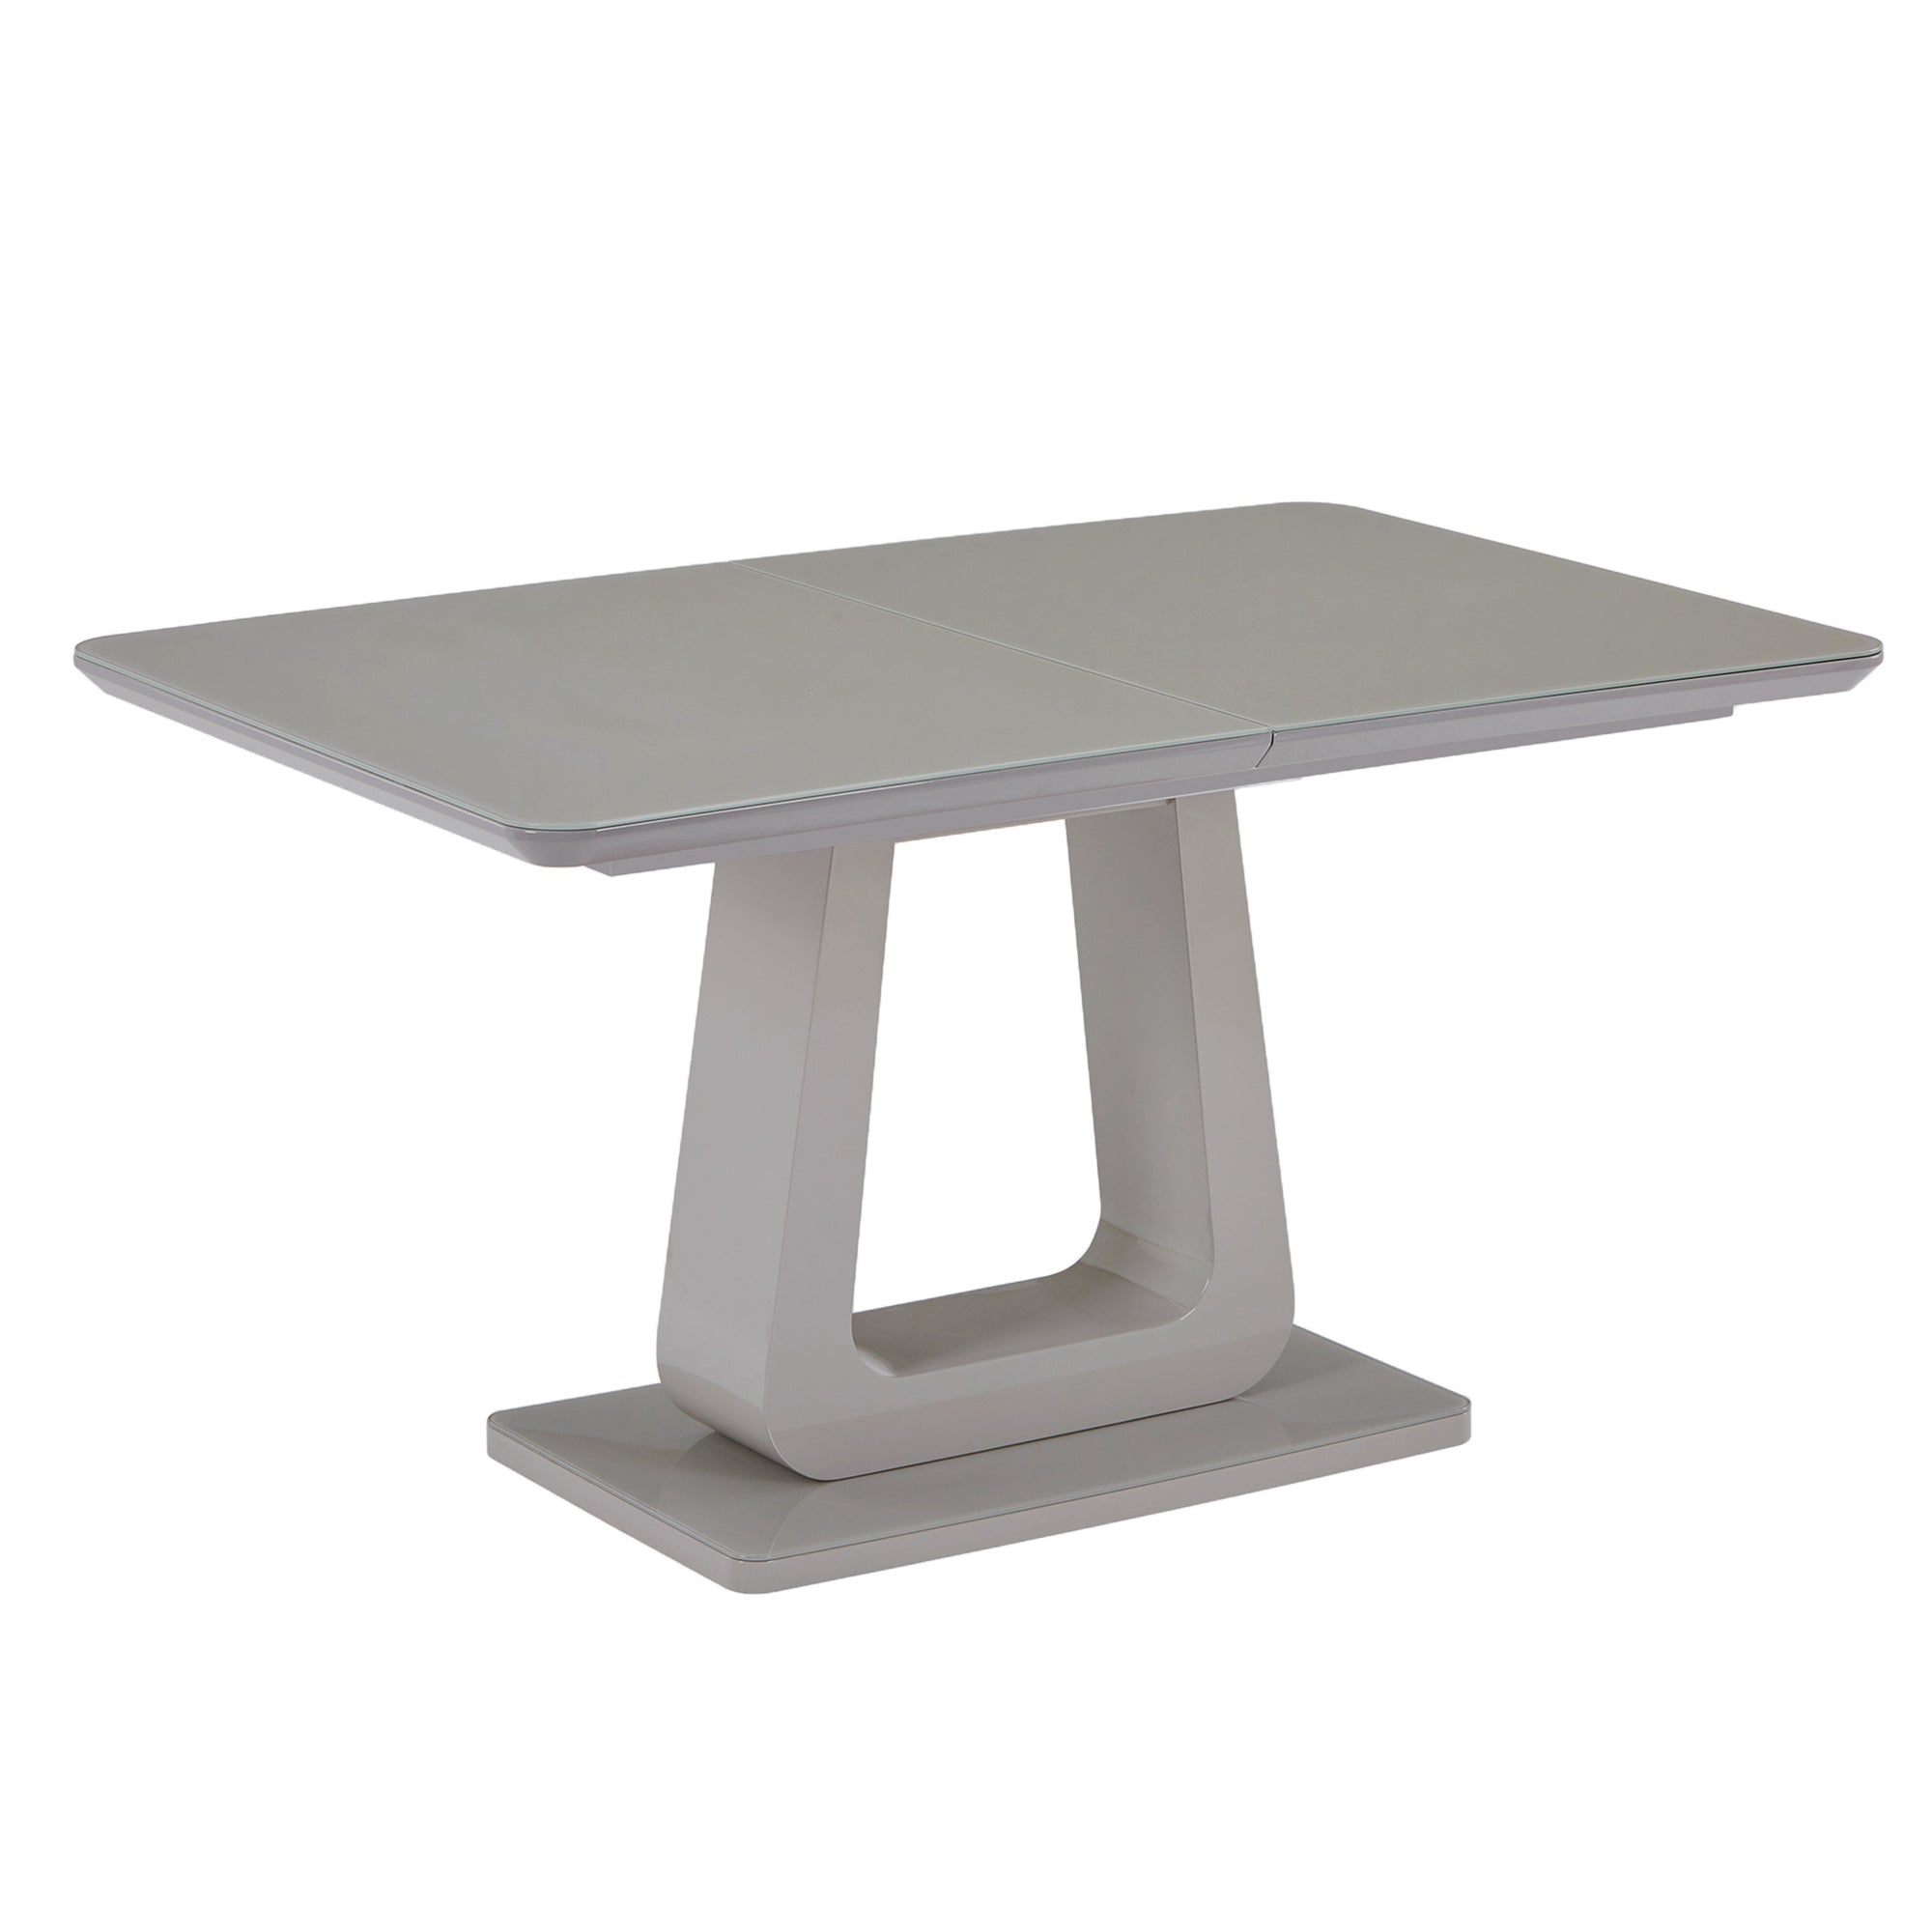 CORVUS-EXTENSION DINING TABLE-WARM GREY